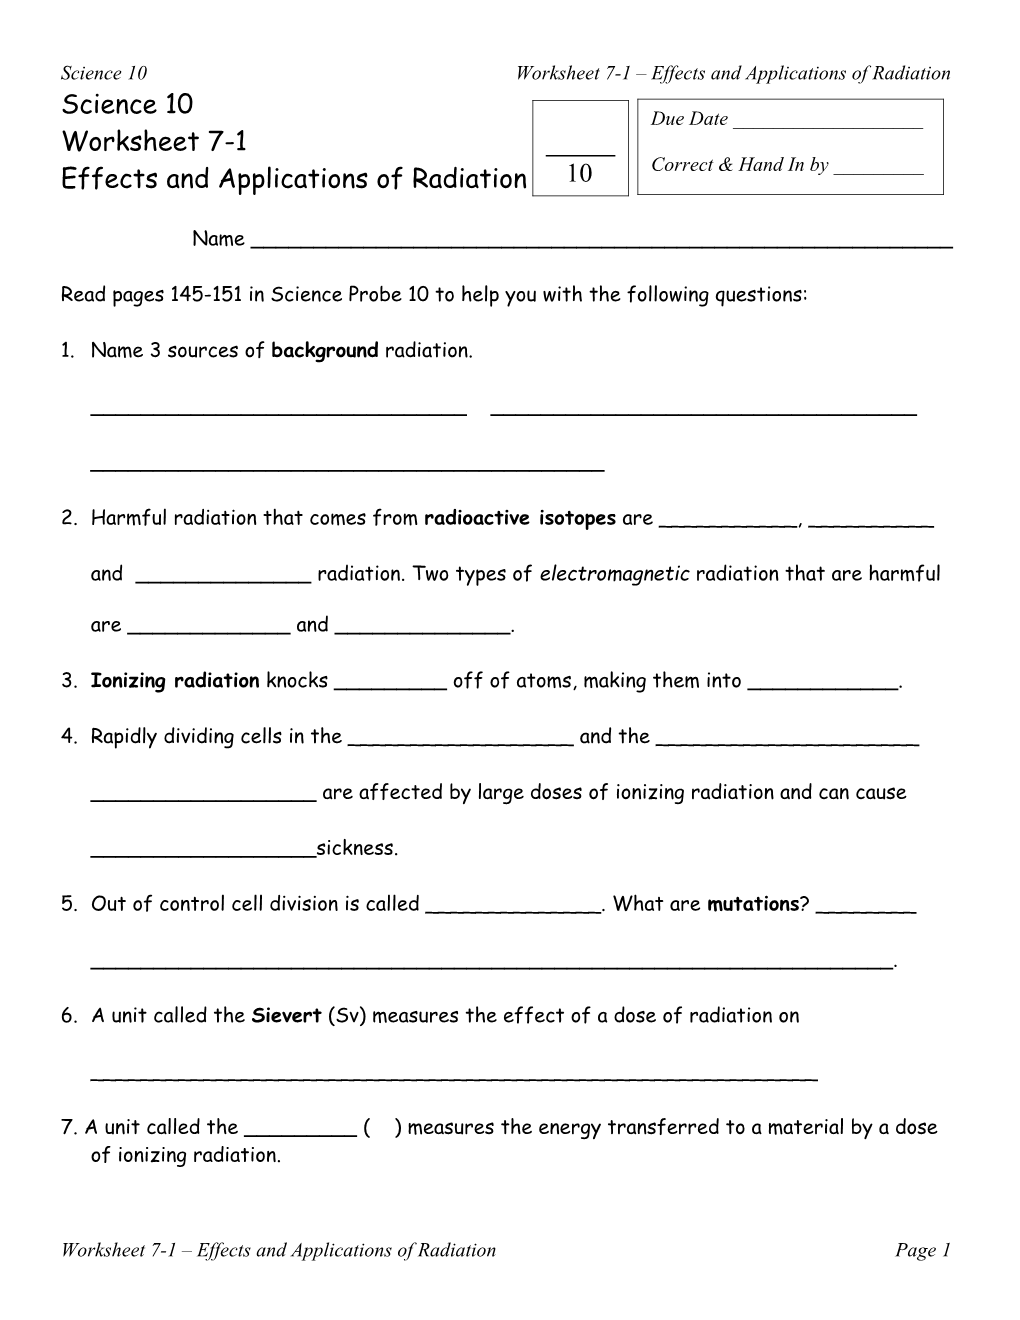 Science 10Worksheet 7-1 Effects and Applications of Radiation